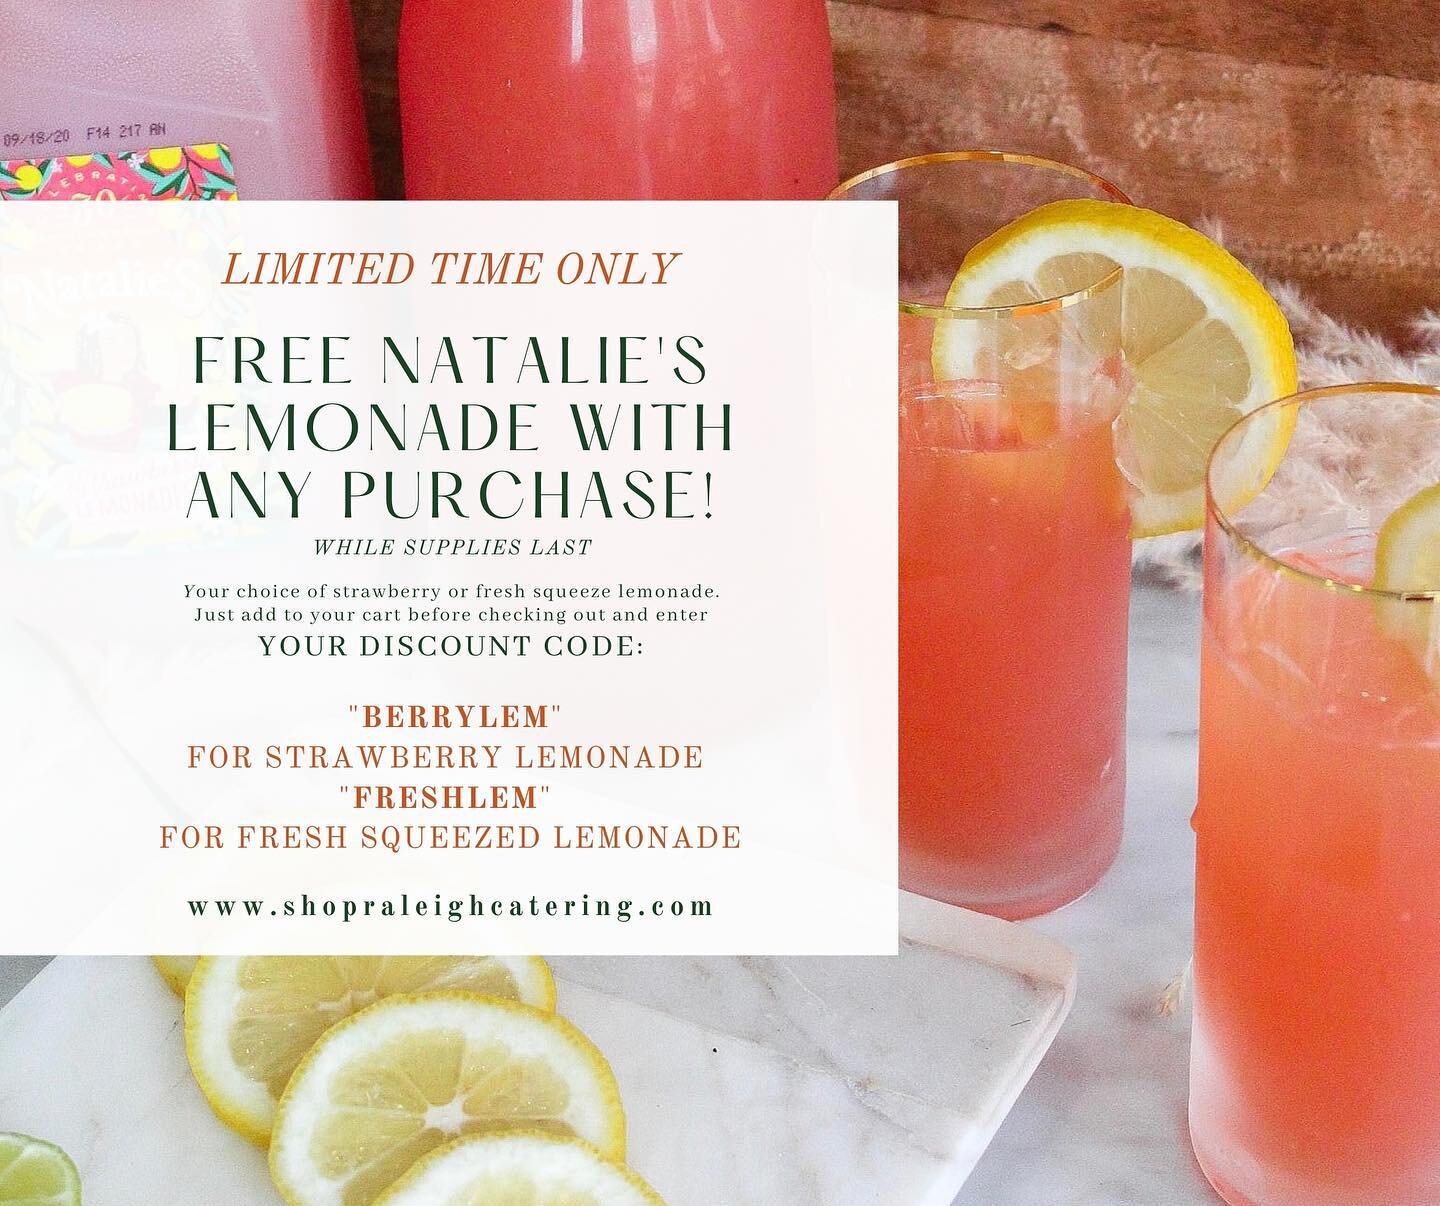 ★ We truly can't thank you all enough for your continued support and love. So, to share our appreciation for all of our customers, for a limited time only and while supplies last, you can grab a FREE Natalie's Lemonade with any purchase! RUN, don't w